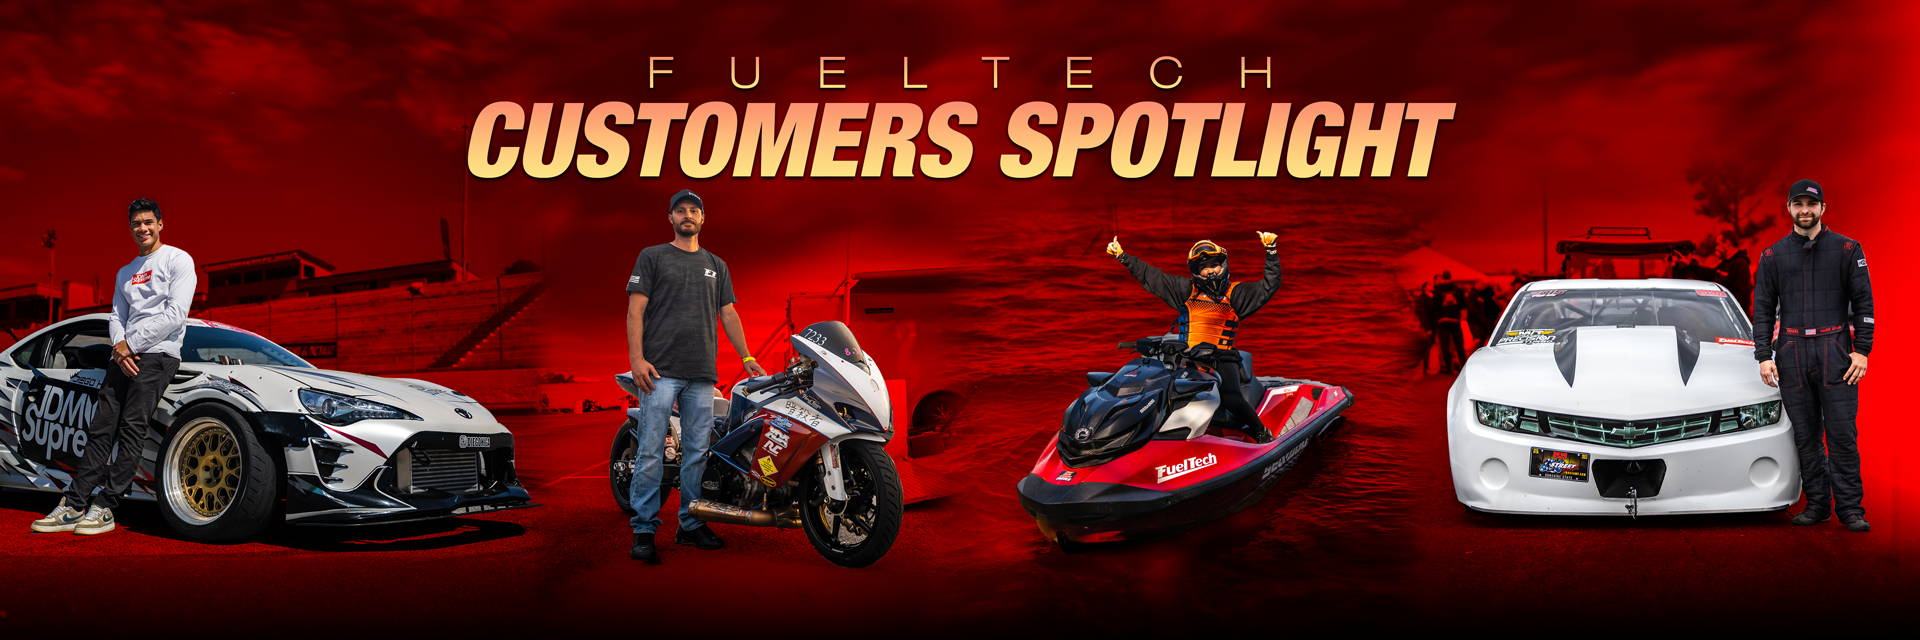 FuelTech Customer Spotlight Submission Page